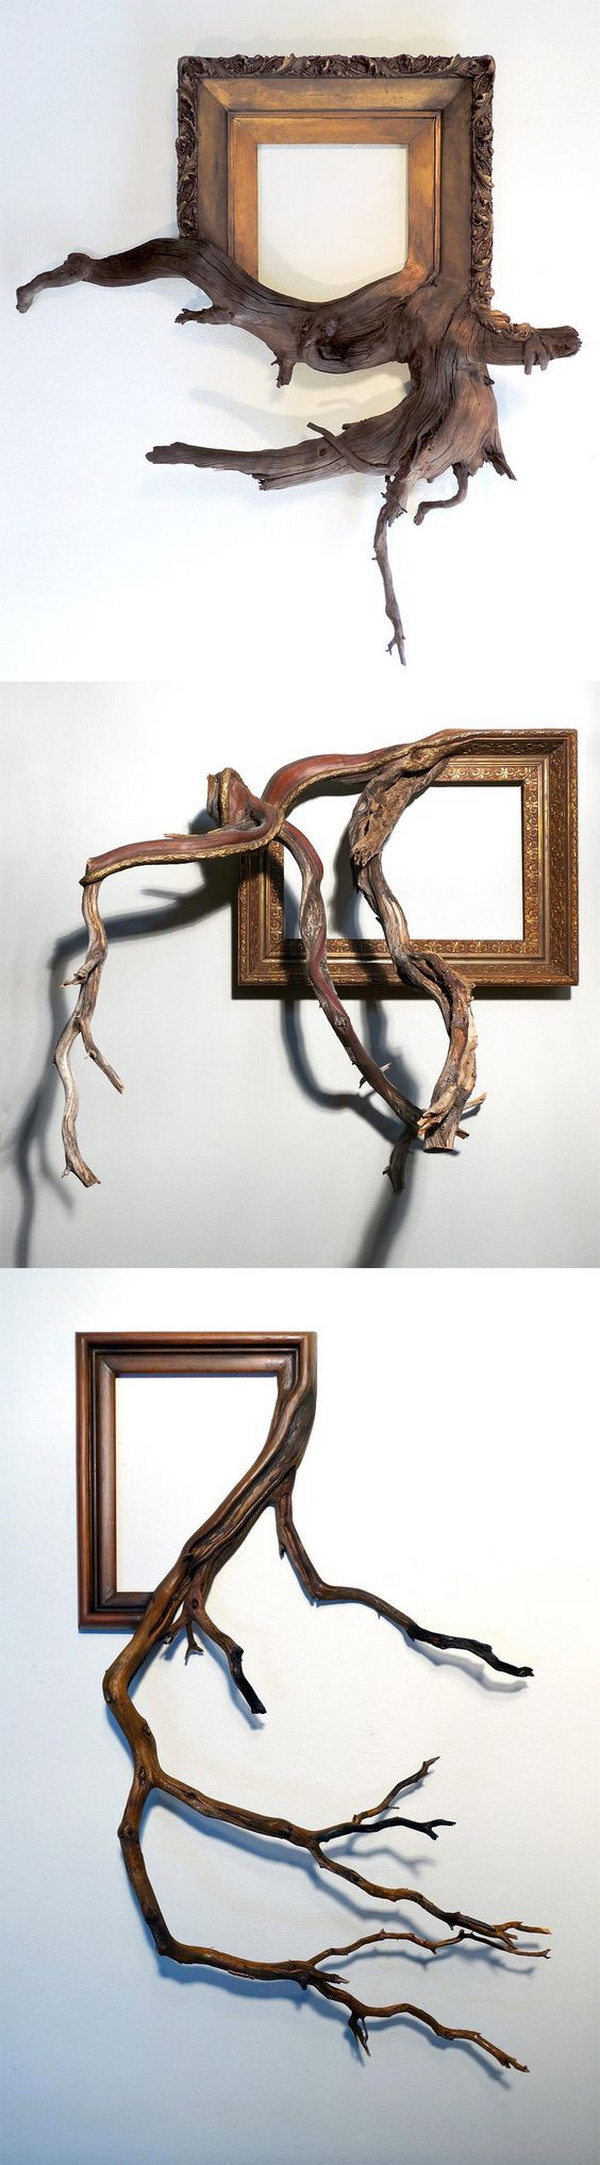 Ornate Vintage Picture Frames with Tree Branches. 